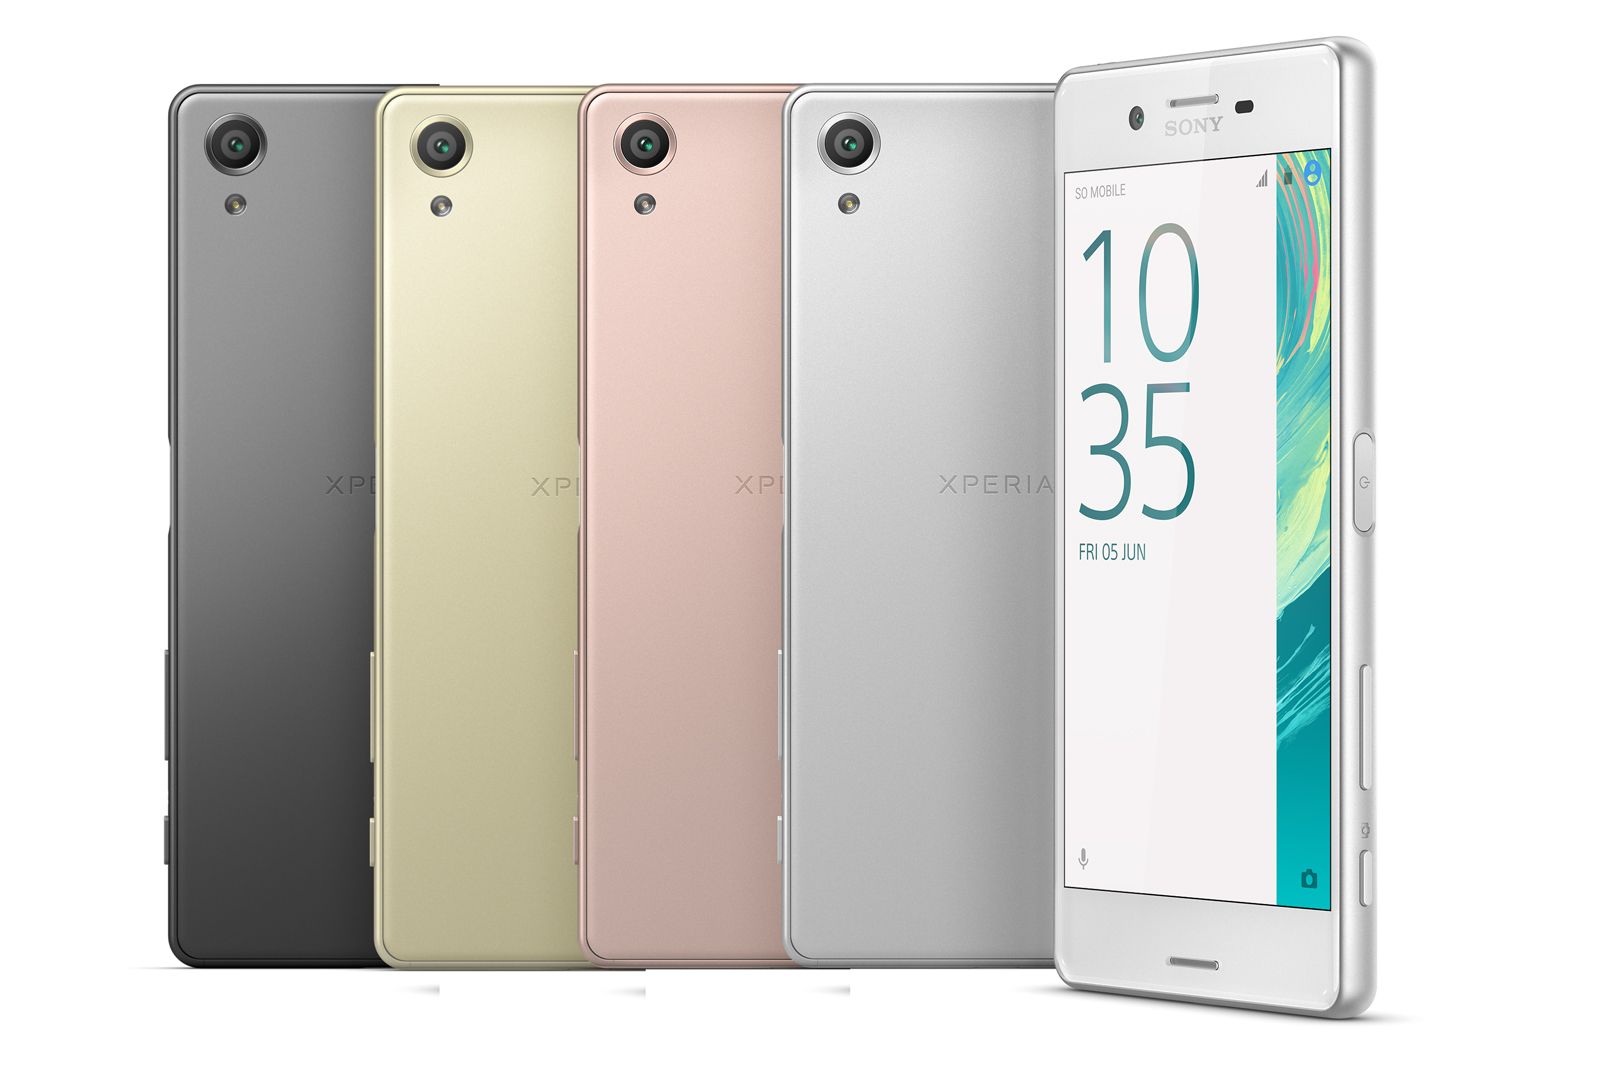 sony stokes sub flagship smartphone selection with new xperia x series image 1